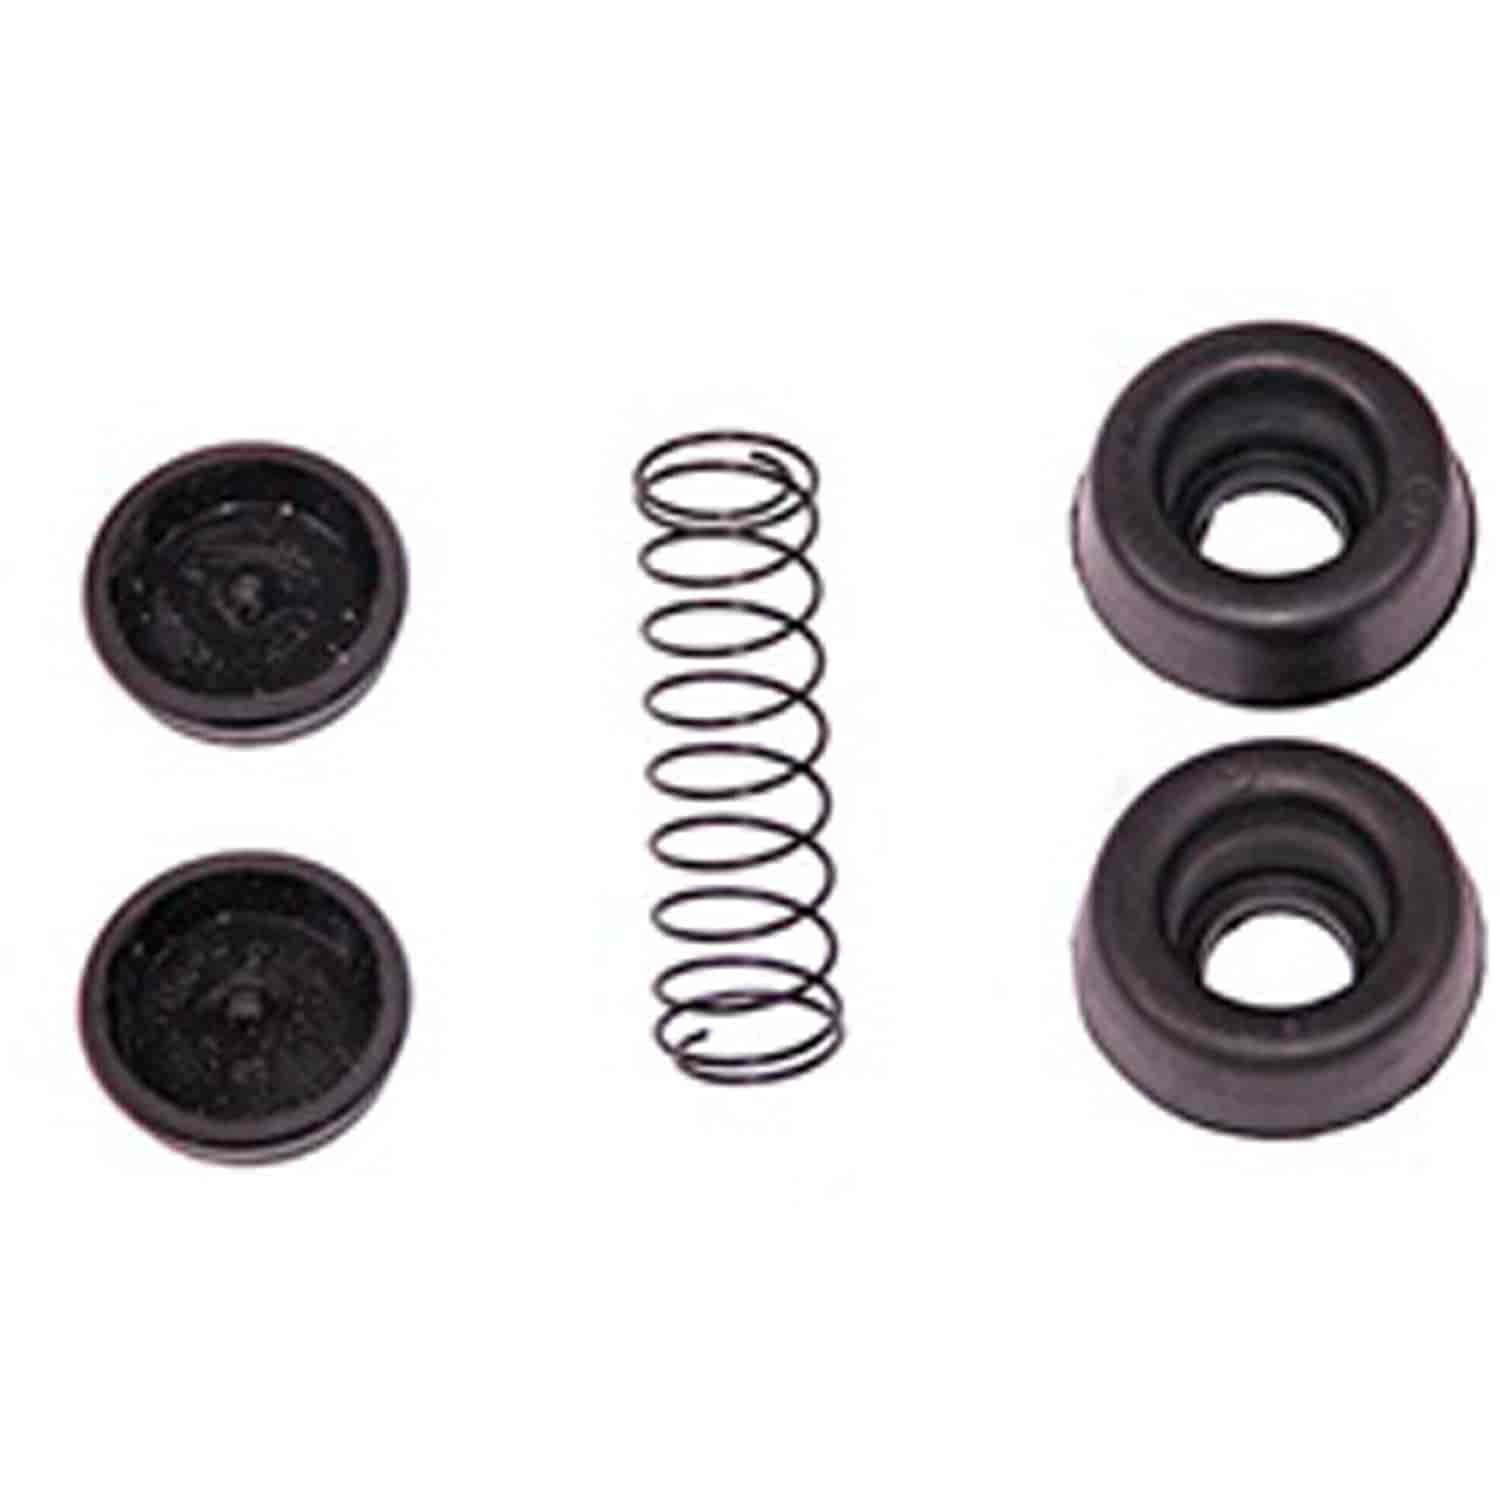 This wheel cylinder repair kit from Omix-ADA allows you to rebuild wheel cylinders with a 15/16 inch bore.